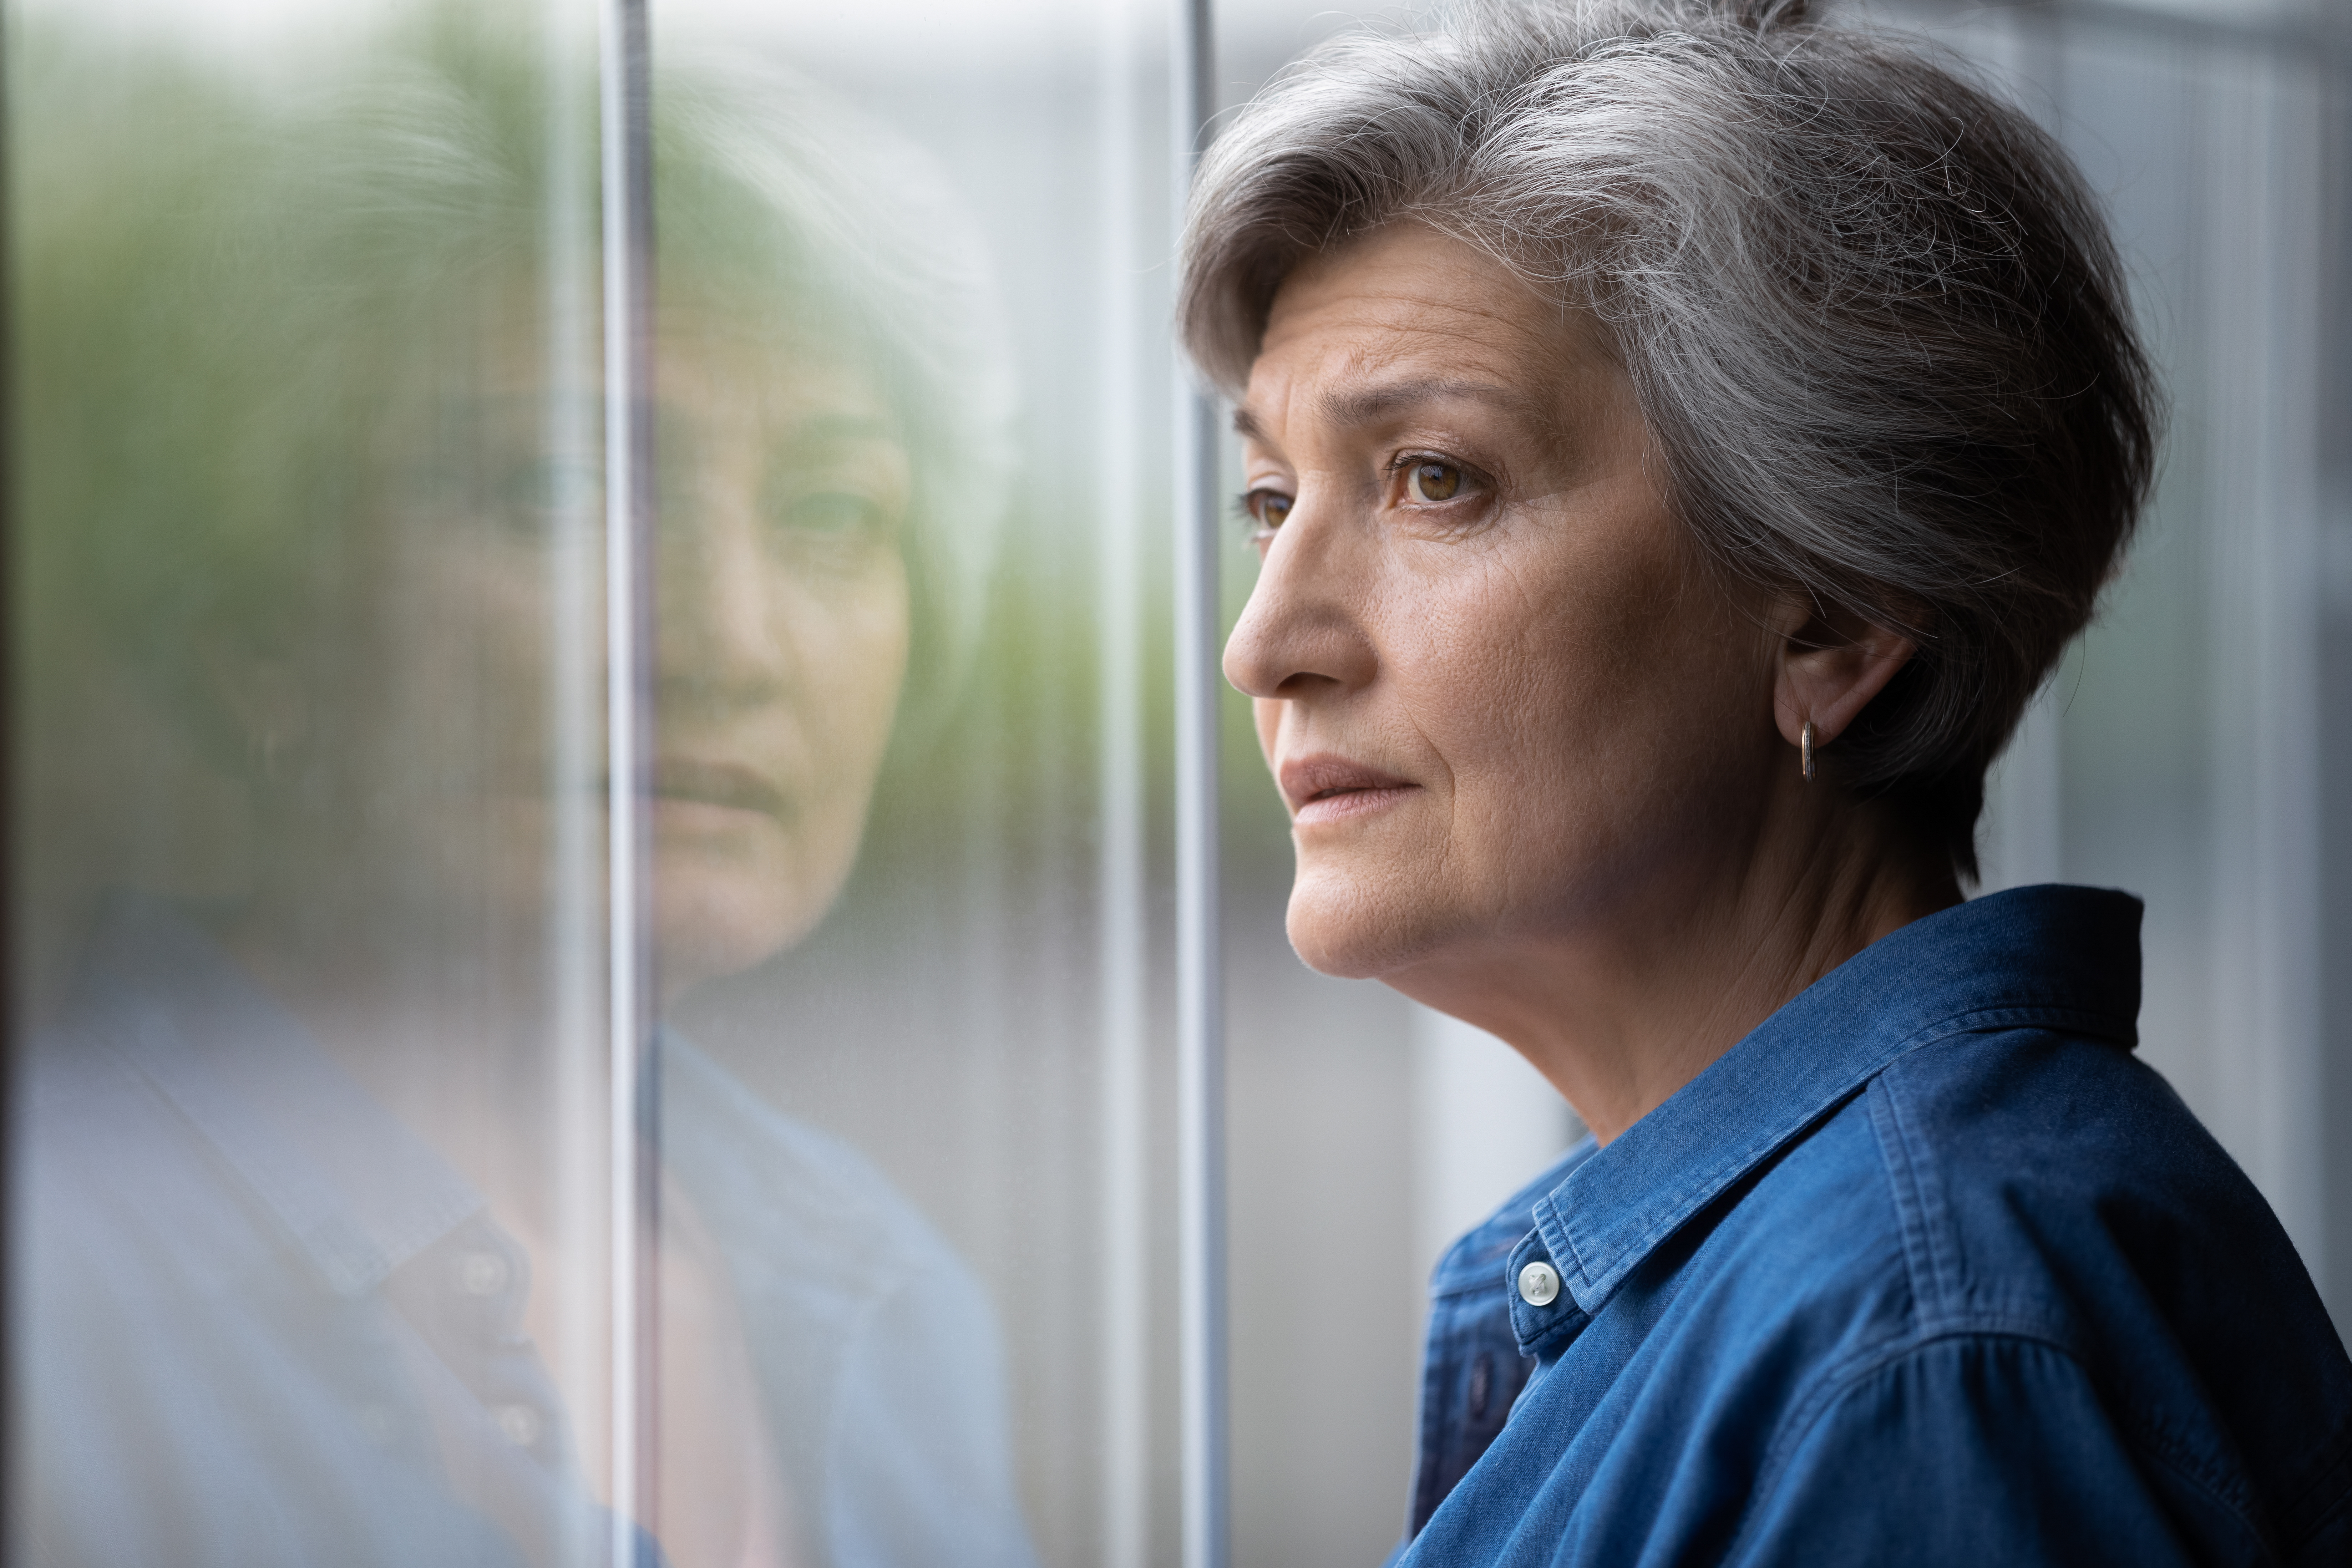 An anxious senior lady looking through the window | Source: Shutterstock